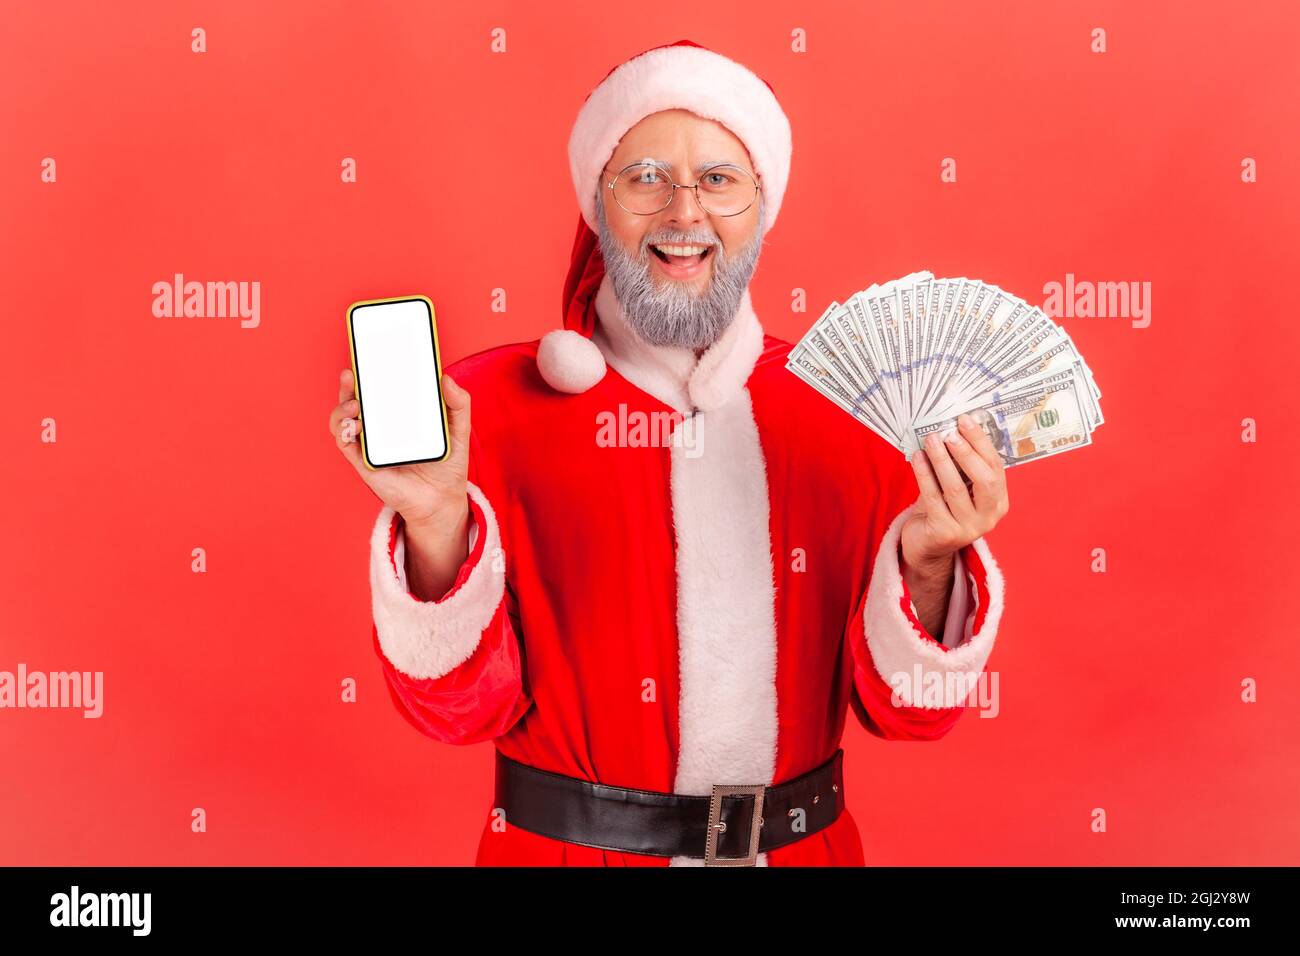 Happy smiling elderly man with gray beard wearing santa claus costume holding fan of money and showing smartphone with white blank screen. Indoor stud Stock Photo